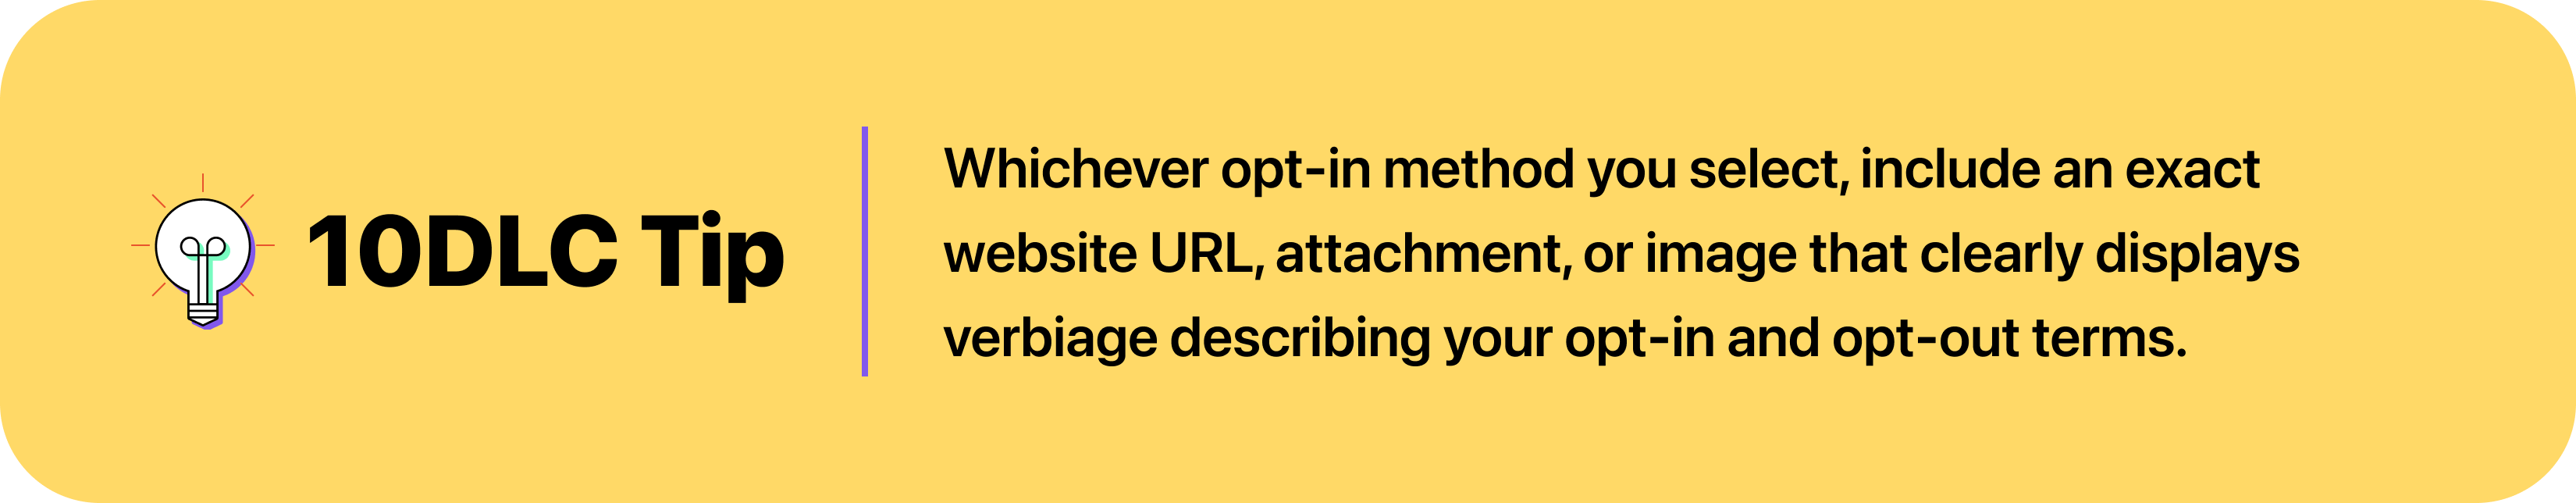 Whichever opt-in method you select, include an exact website URL, attachment, or image that clearly displays verbiage describing your opt-in and opt-out terms.